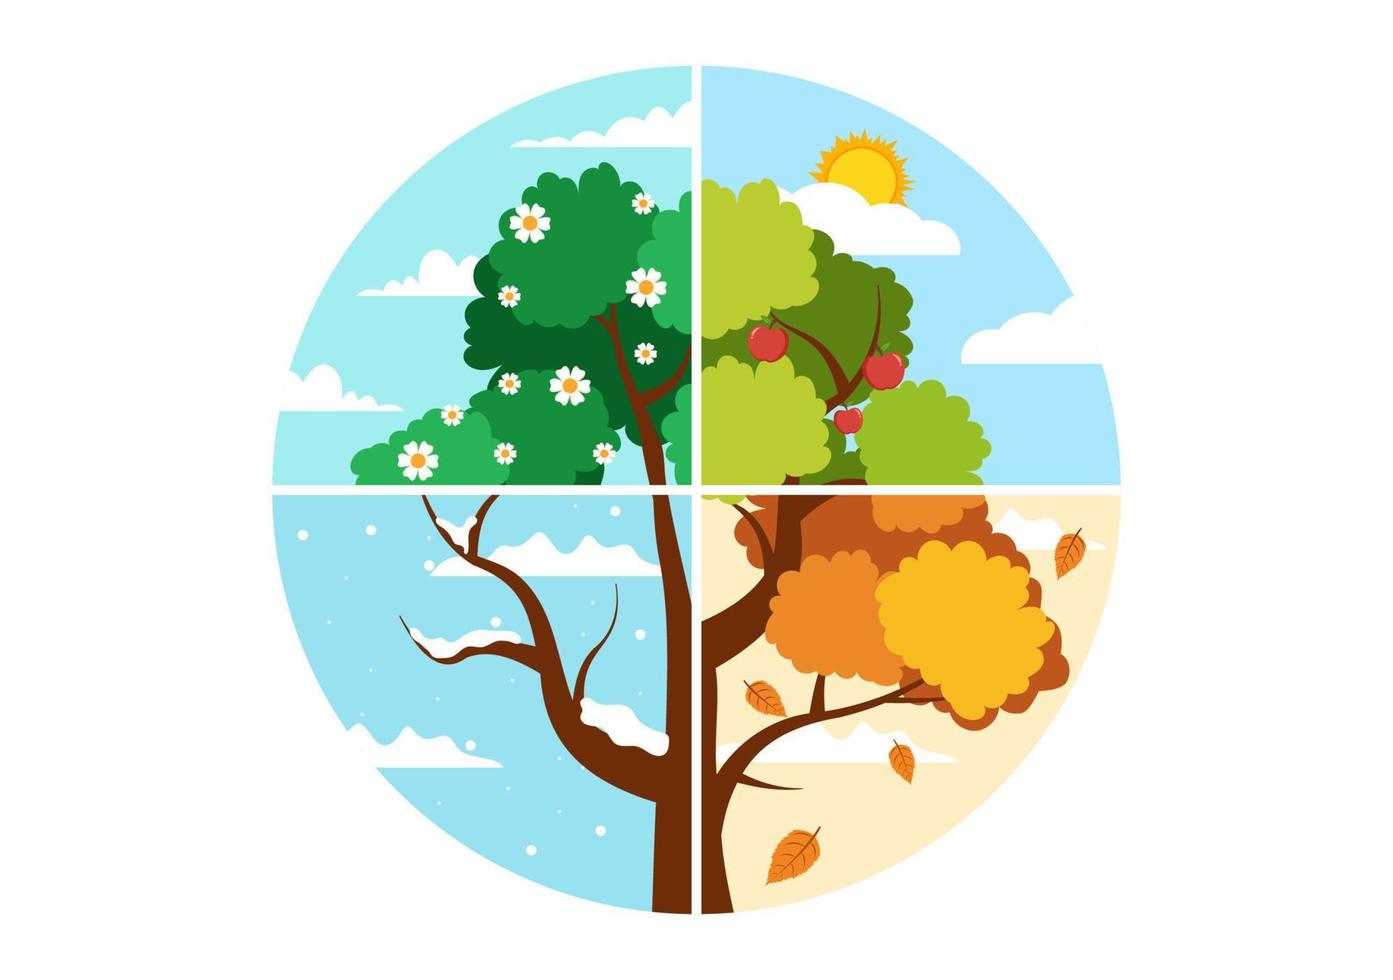 Scenery of the Four Seasons of Nature with Landscape Spring, Summer, Autumn and Winter in Template Hand Drawn Cartoon Flat Style Illustration vector